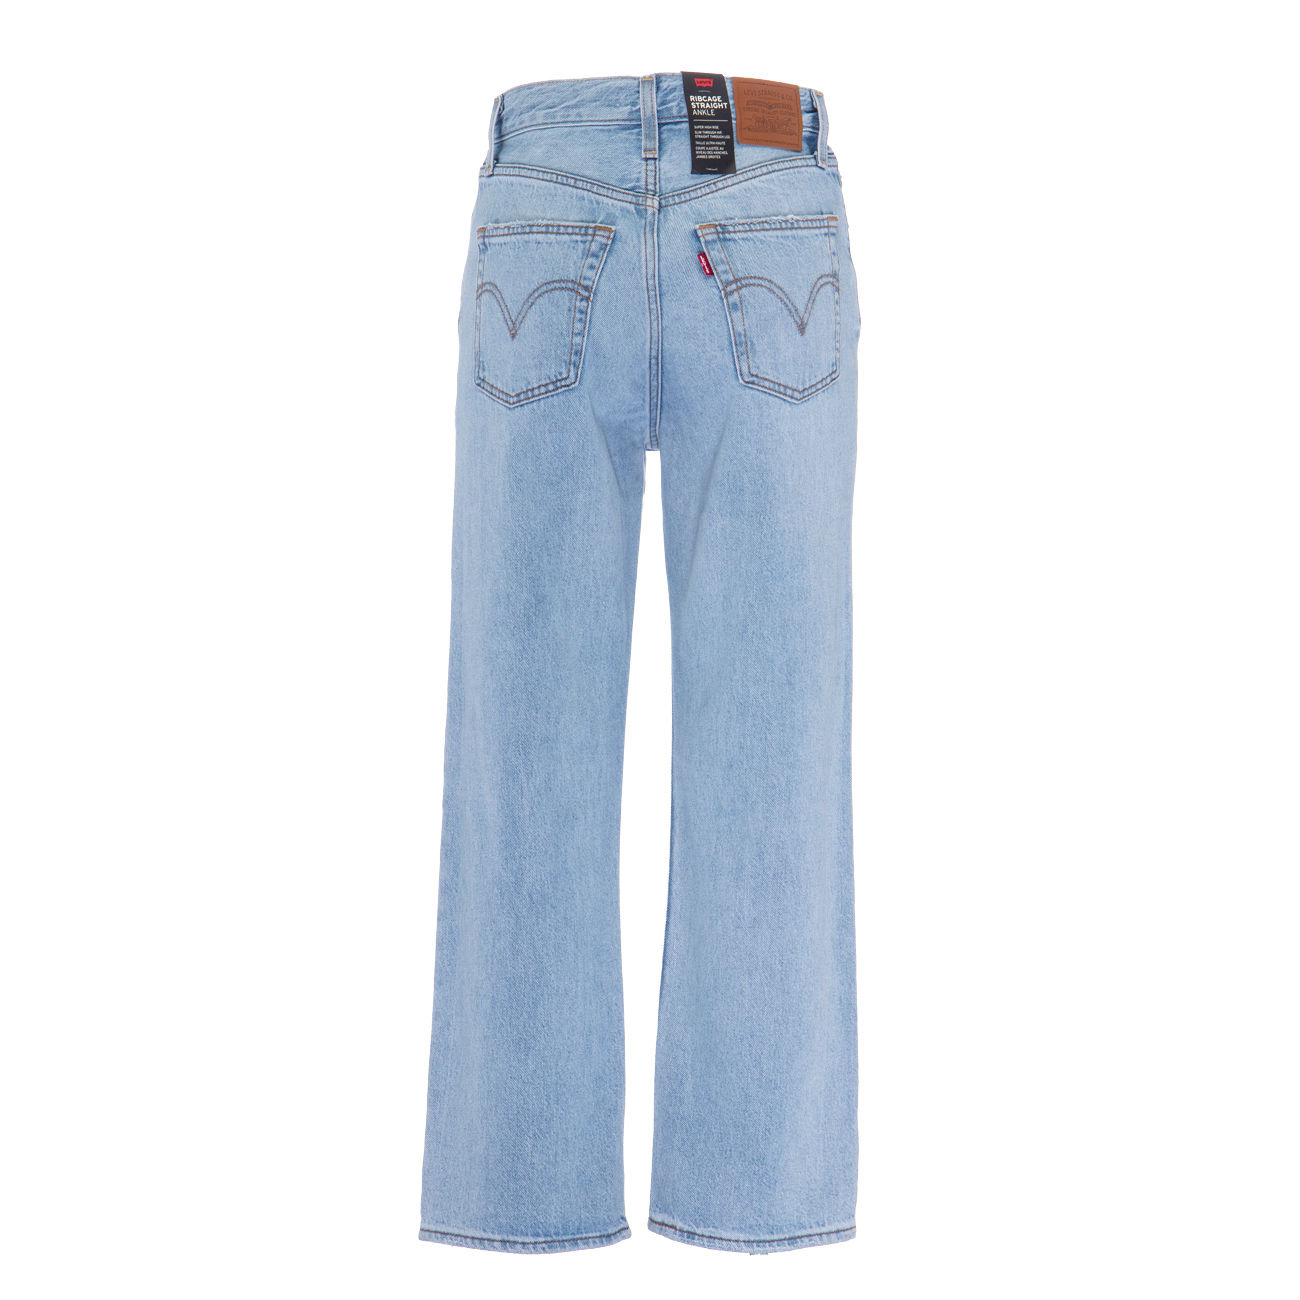 LEVIS RIBCAGE STRAIGHT ANKLE JEANS Woman Middle road | Mascheroni Store